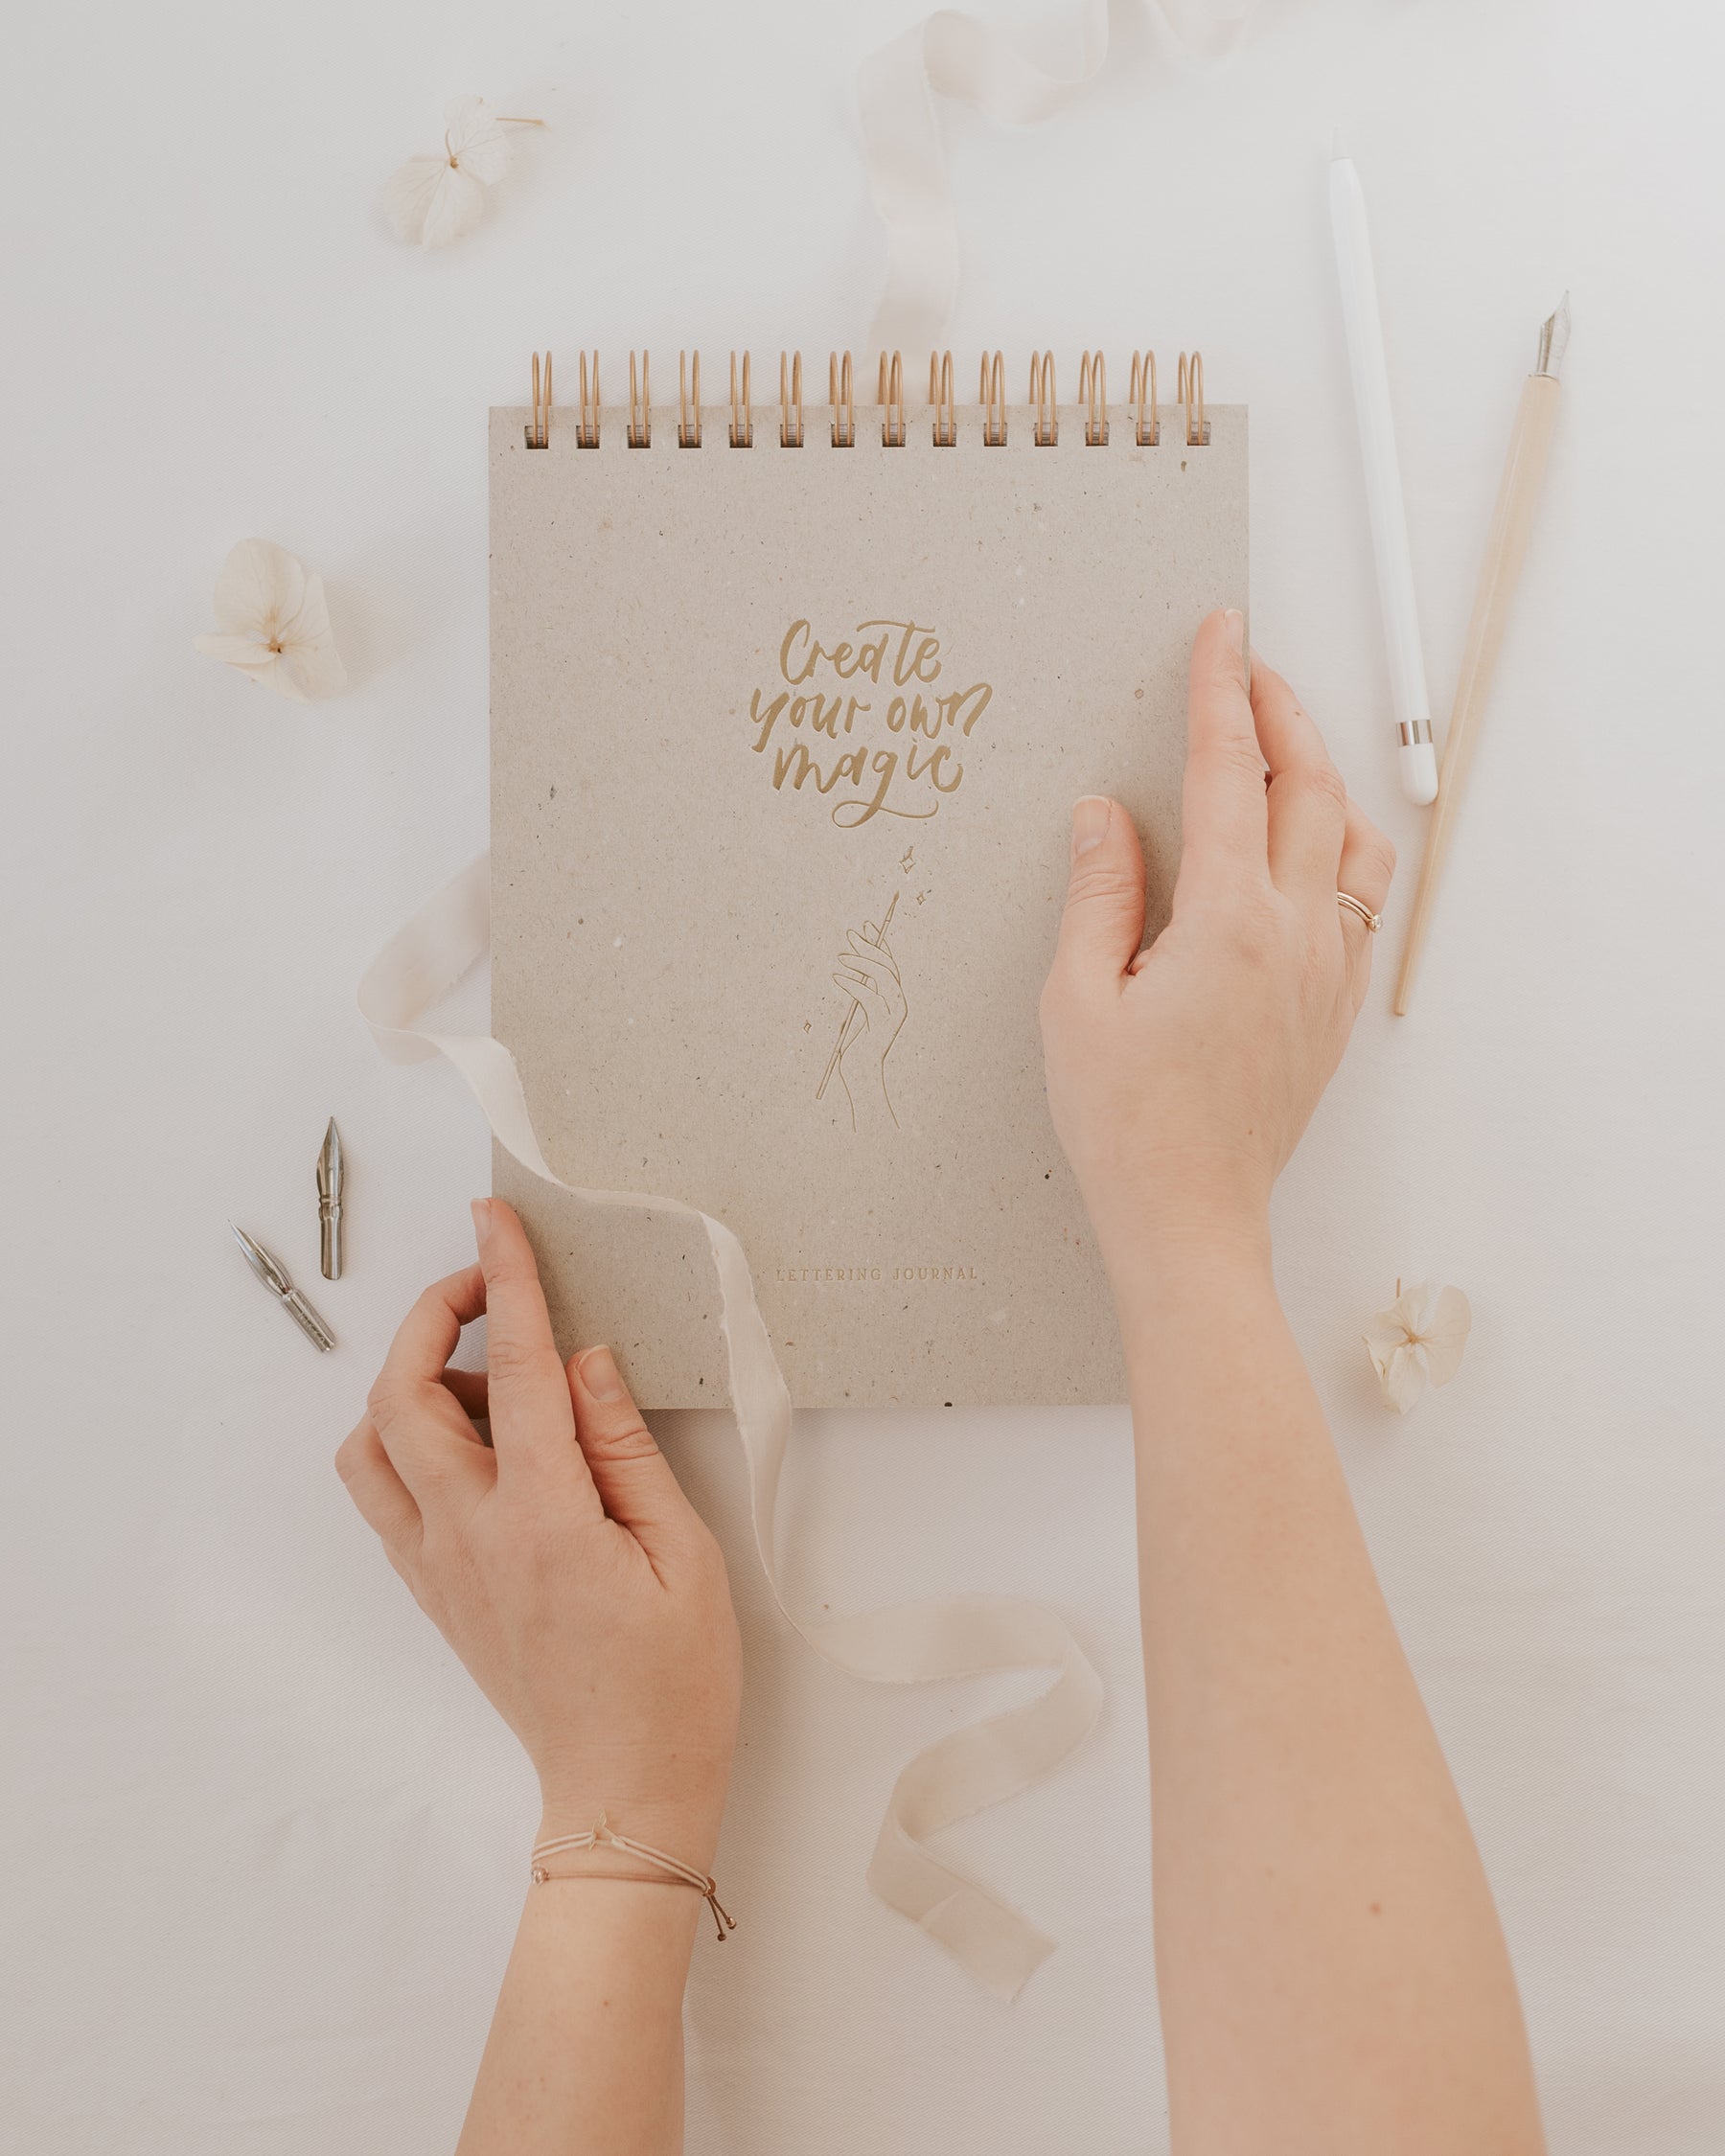 Handlettering Journal "Create your own magic"